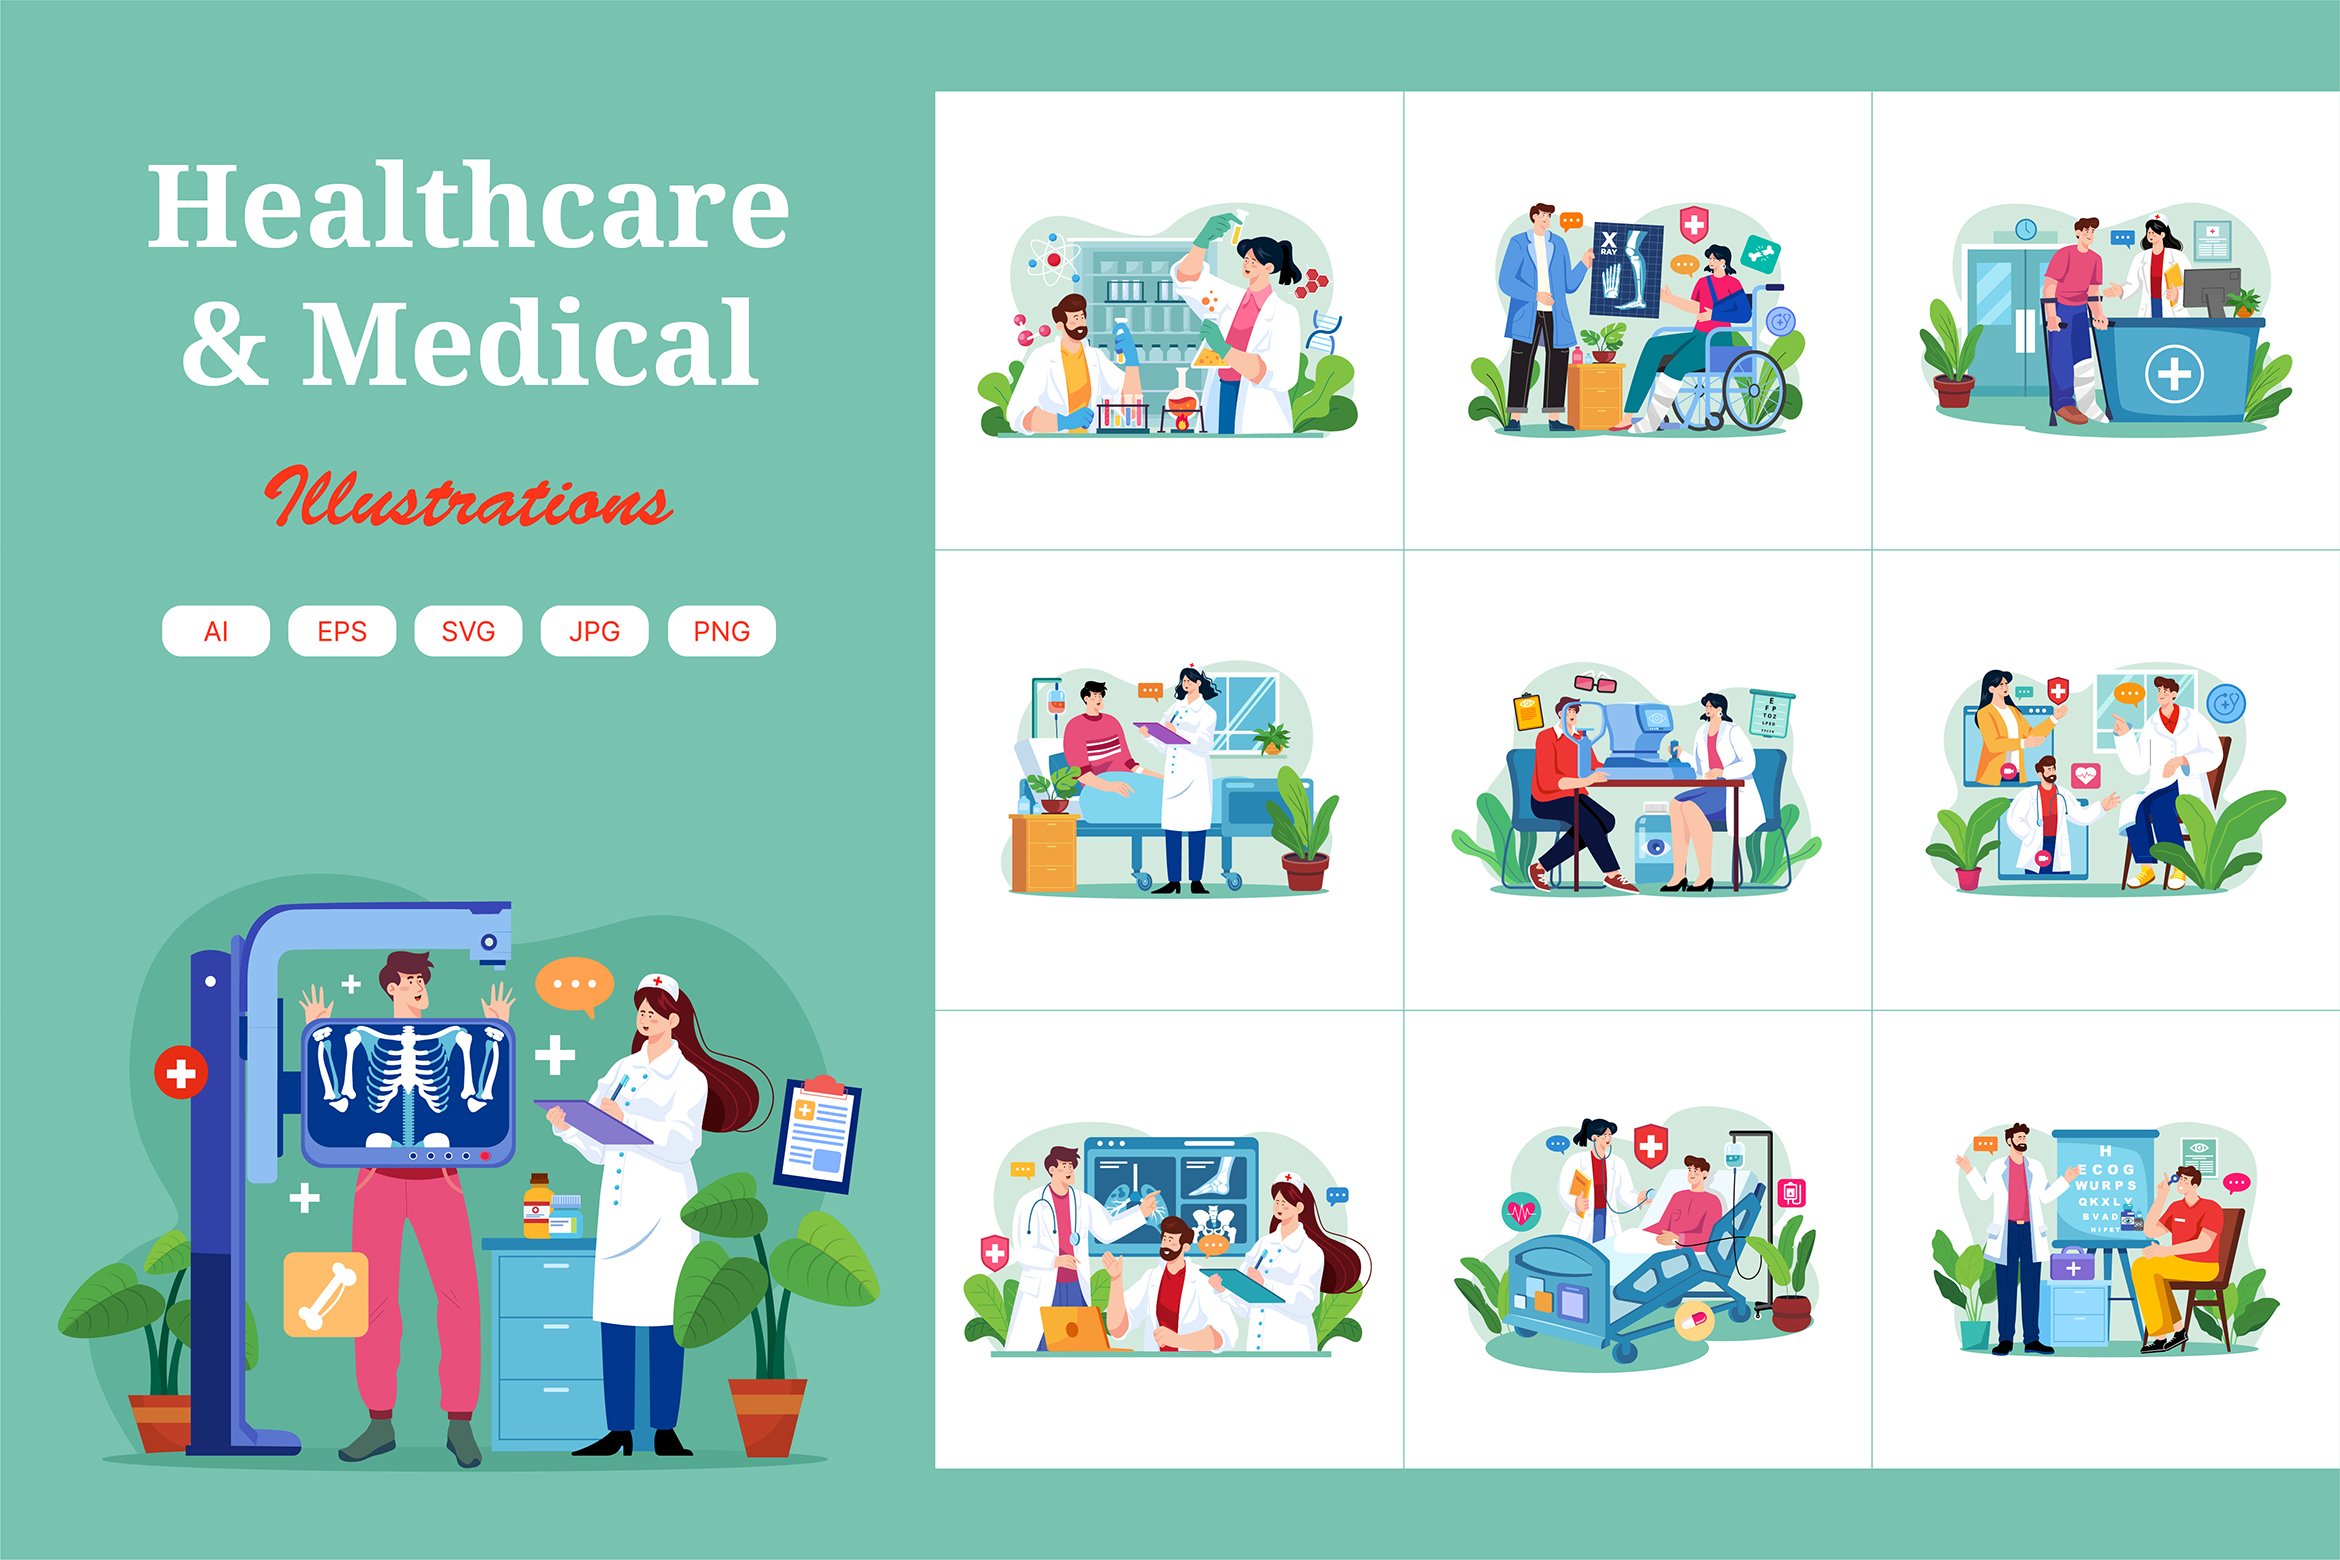 M701_Healthcare & Medical_Pack 2 cover image.